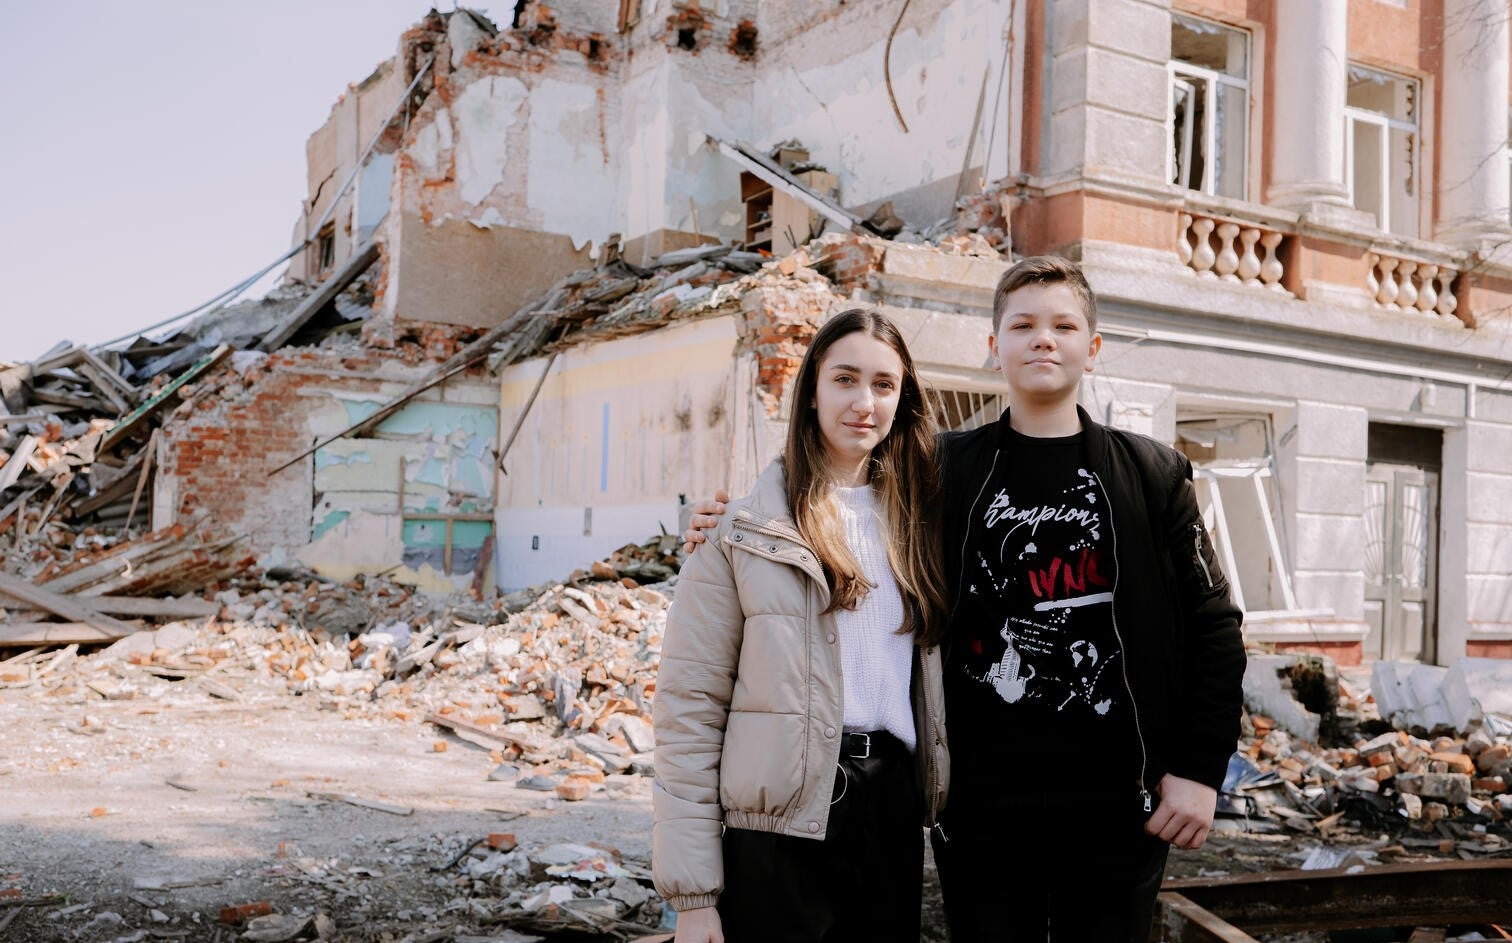 A brother and sister out the front of their destroyed home in Ukraine.